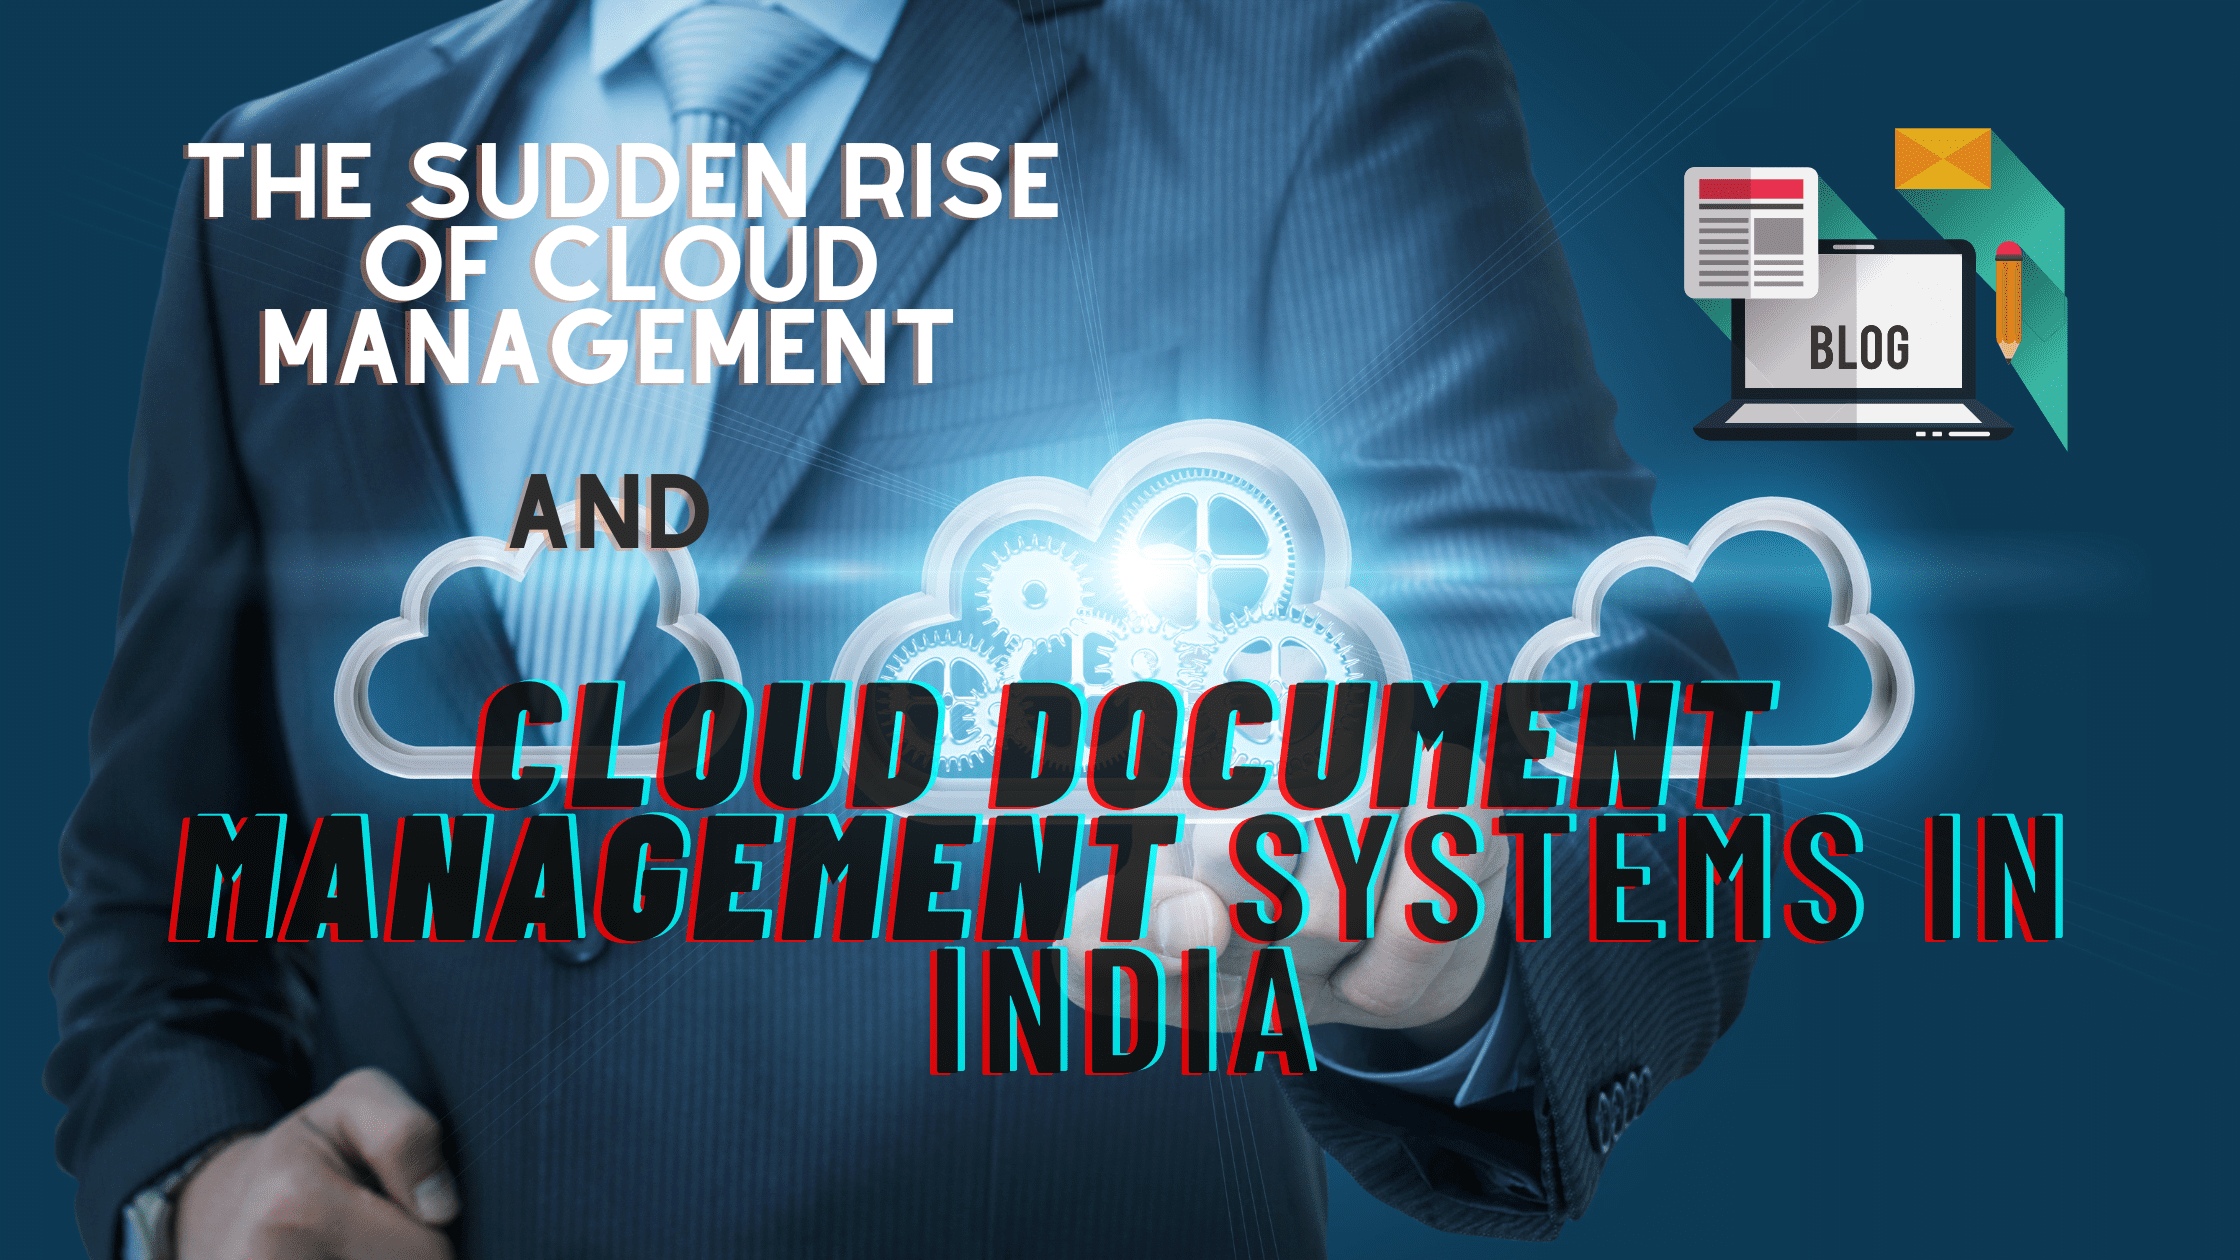 The Sudden Rise of Cloud Management Systems in India